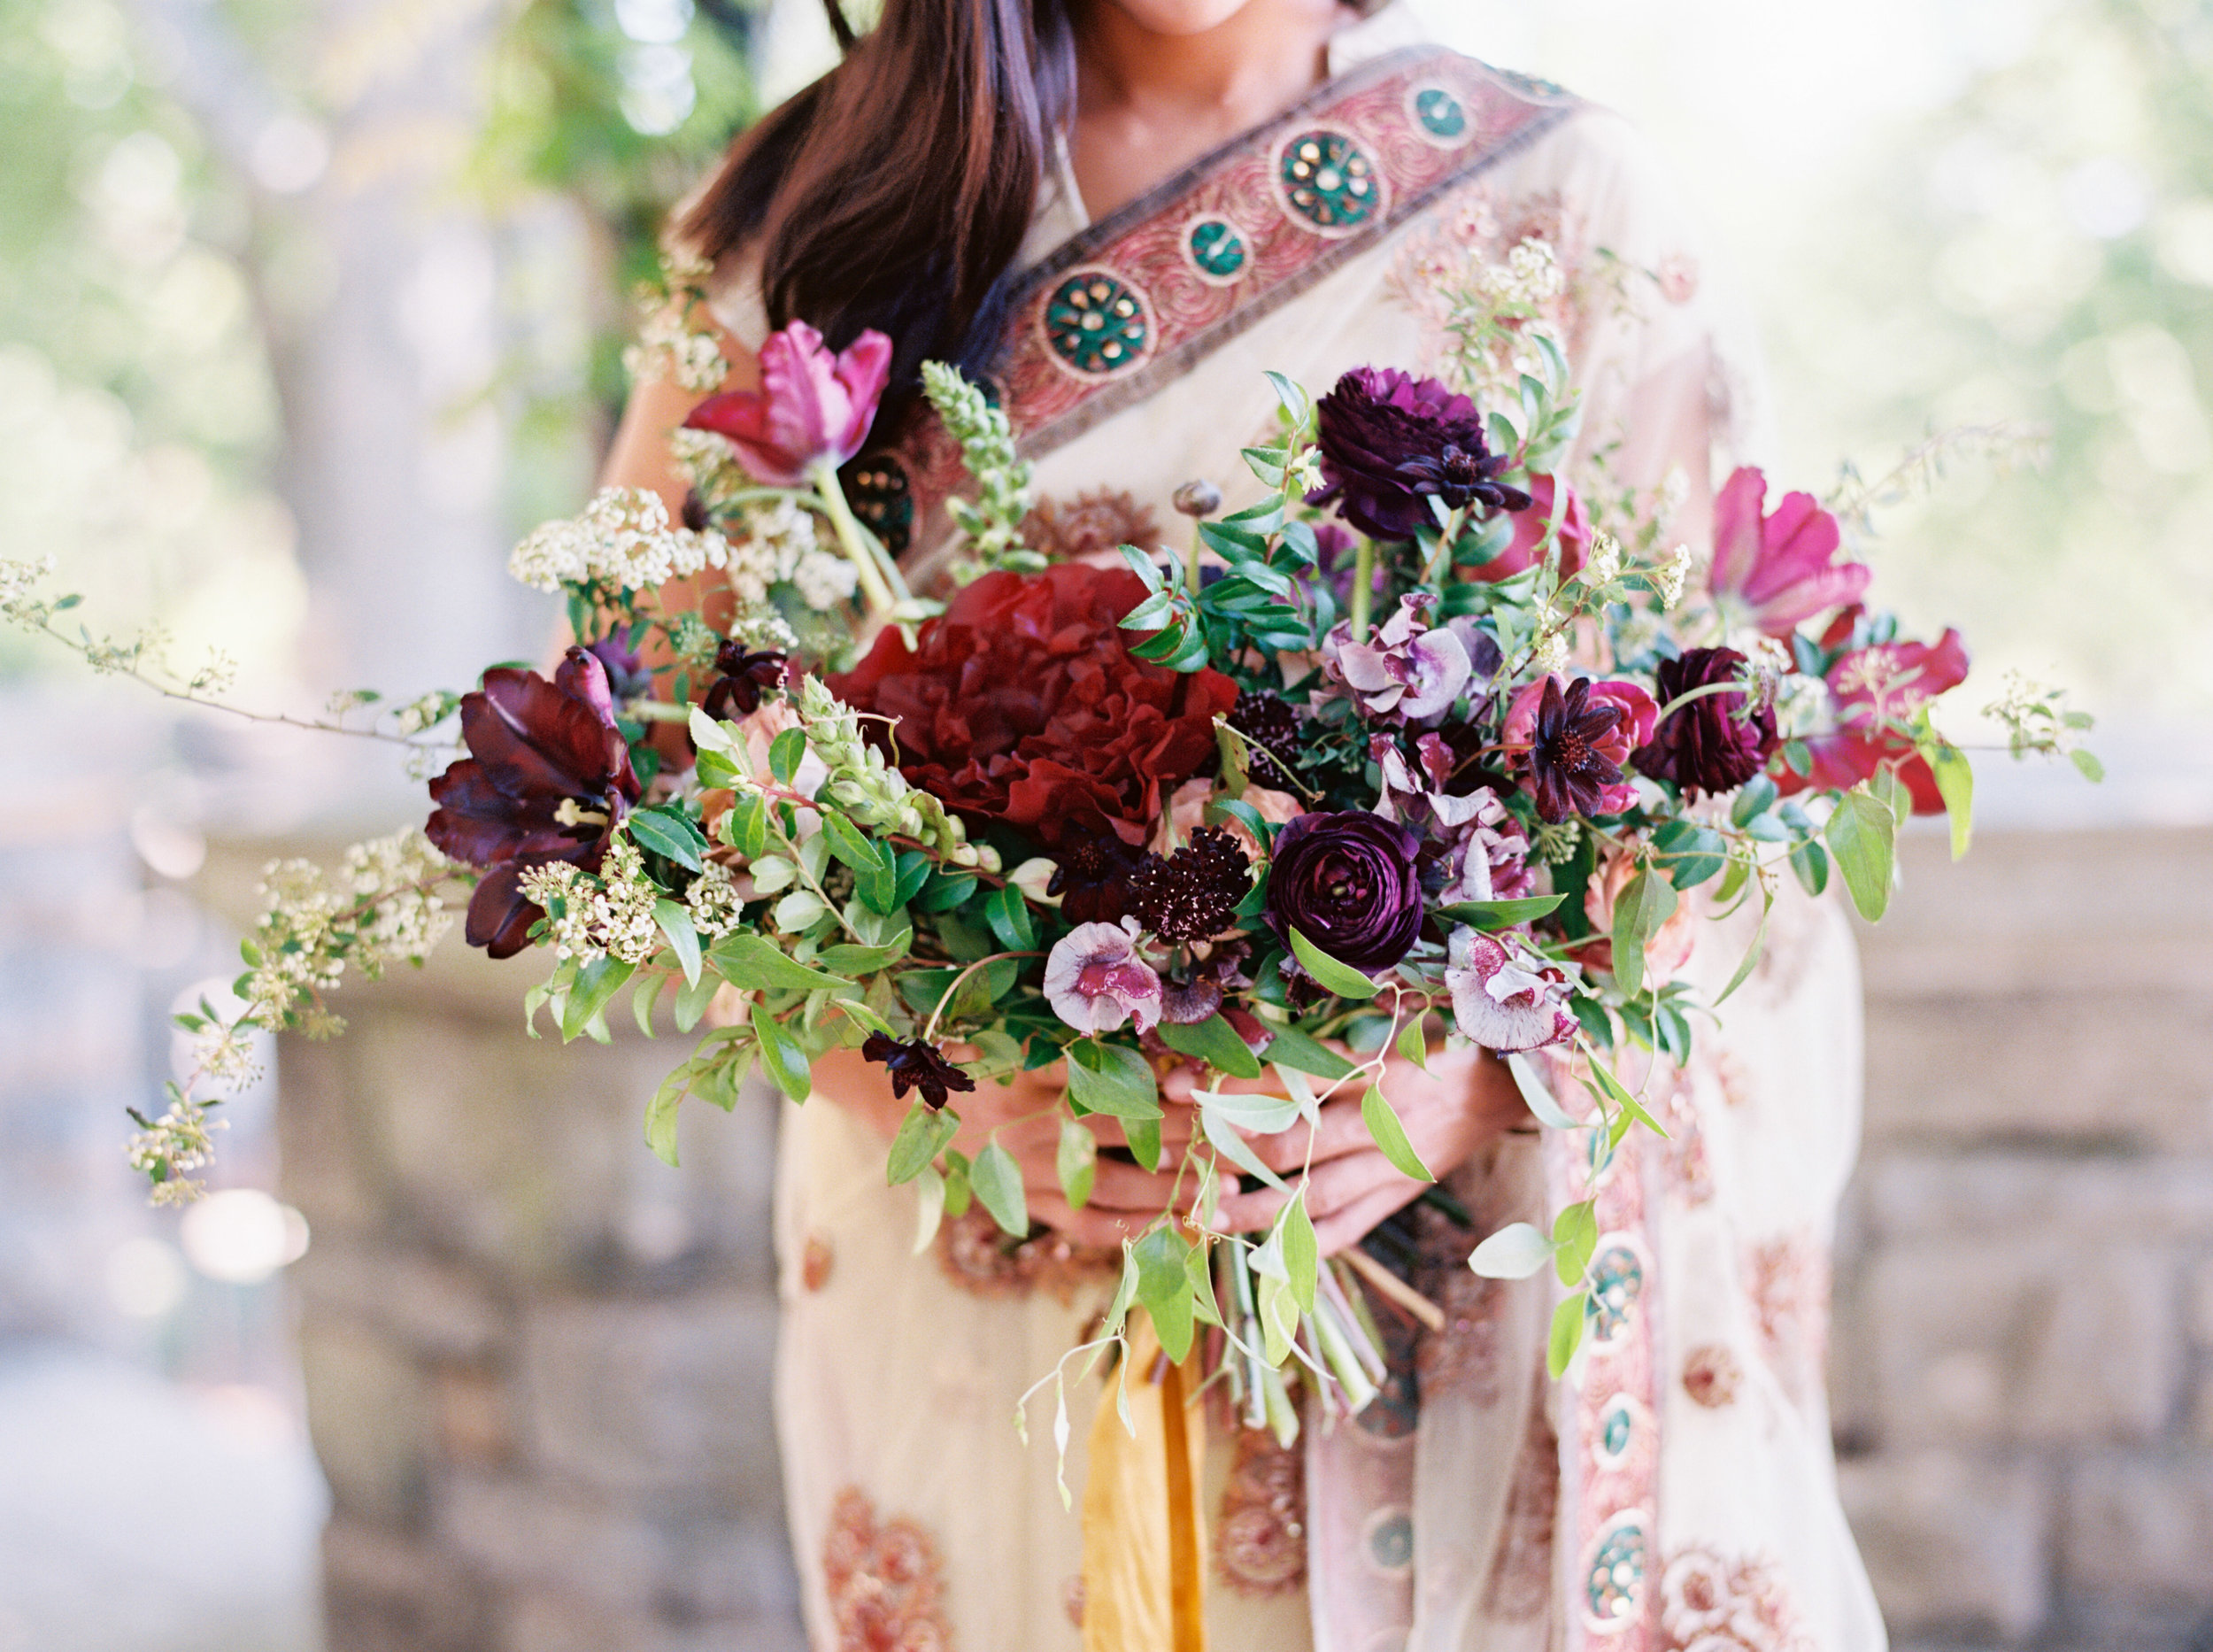 Indian Bridal Portraits at Cheekwood // Lush, untamed bridal bouquet in shades of plum and marsala